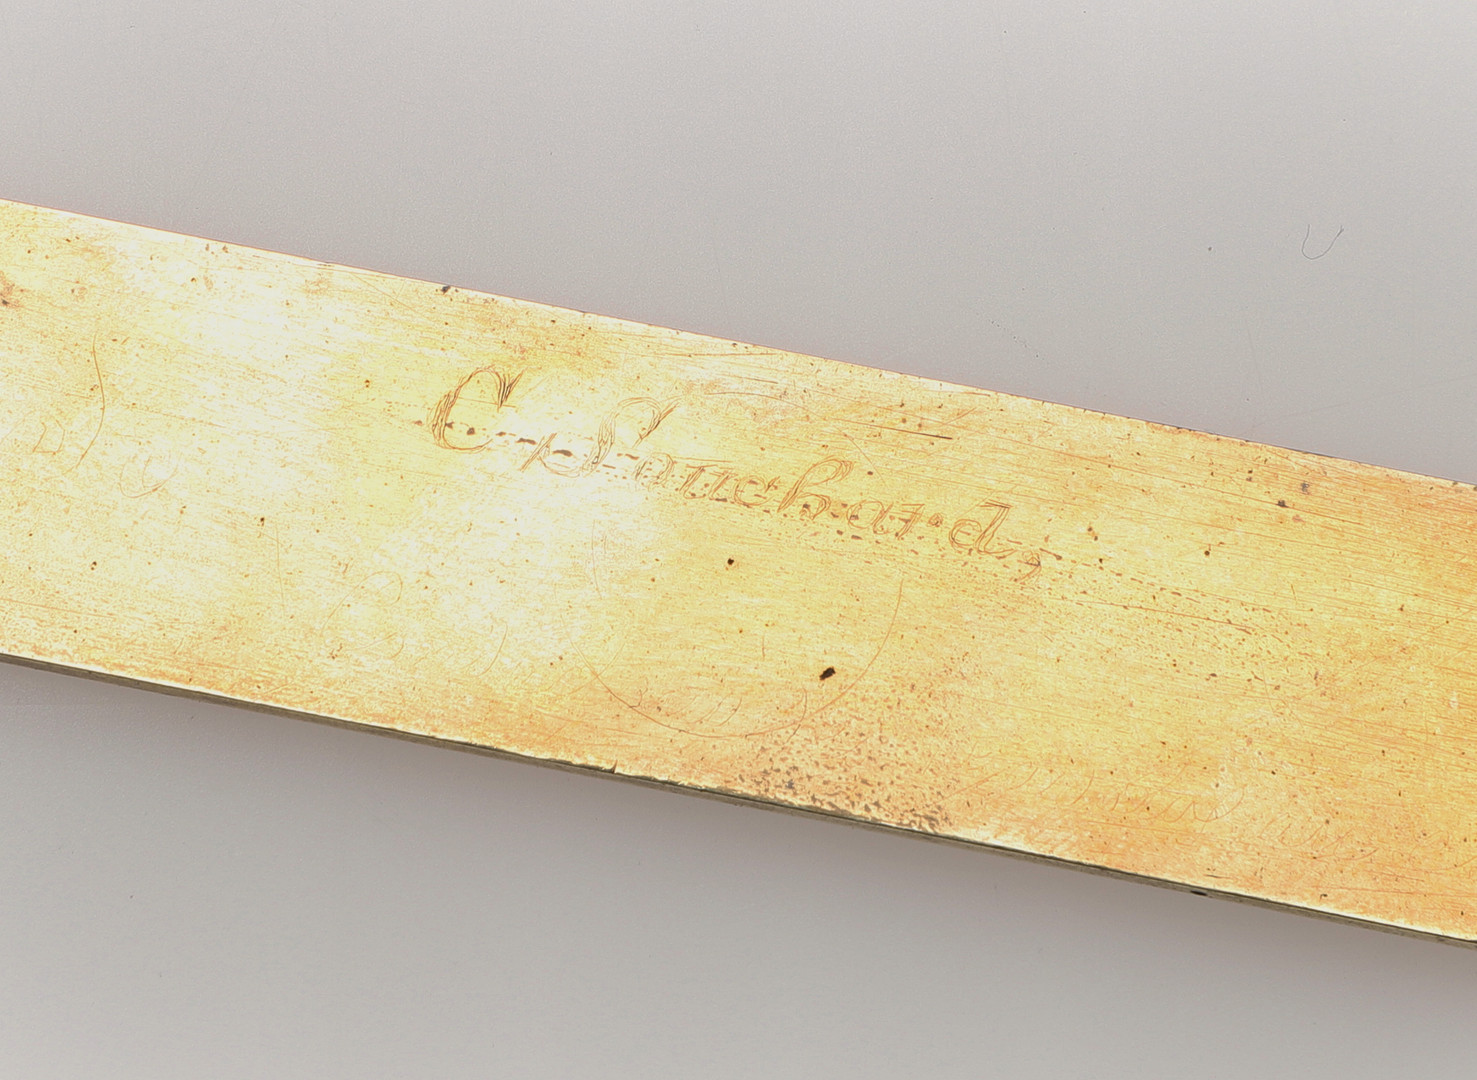 A LATE 17TH CENTURY BRASS FOLDING RULE. - Image 6 of 6